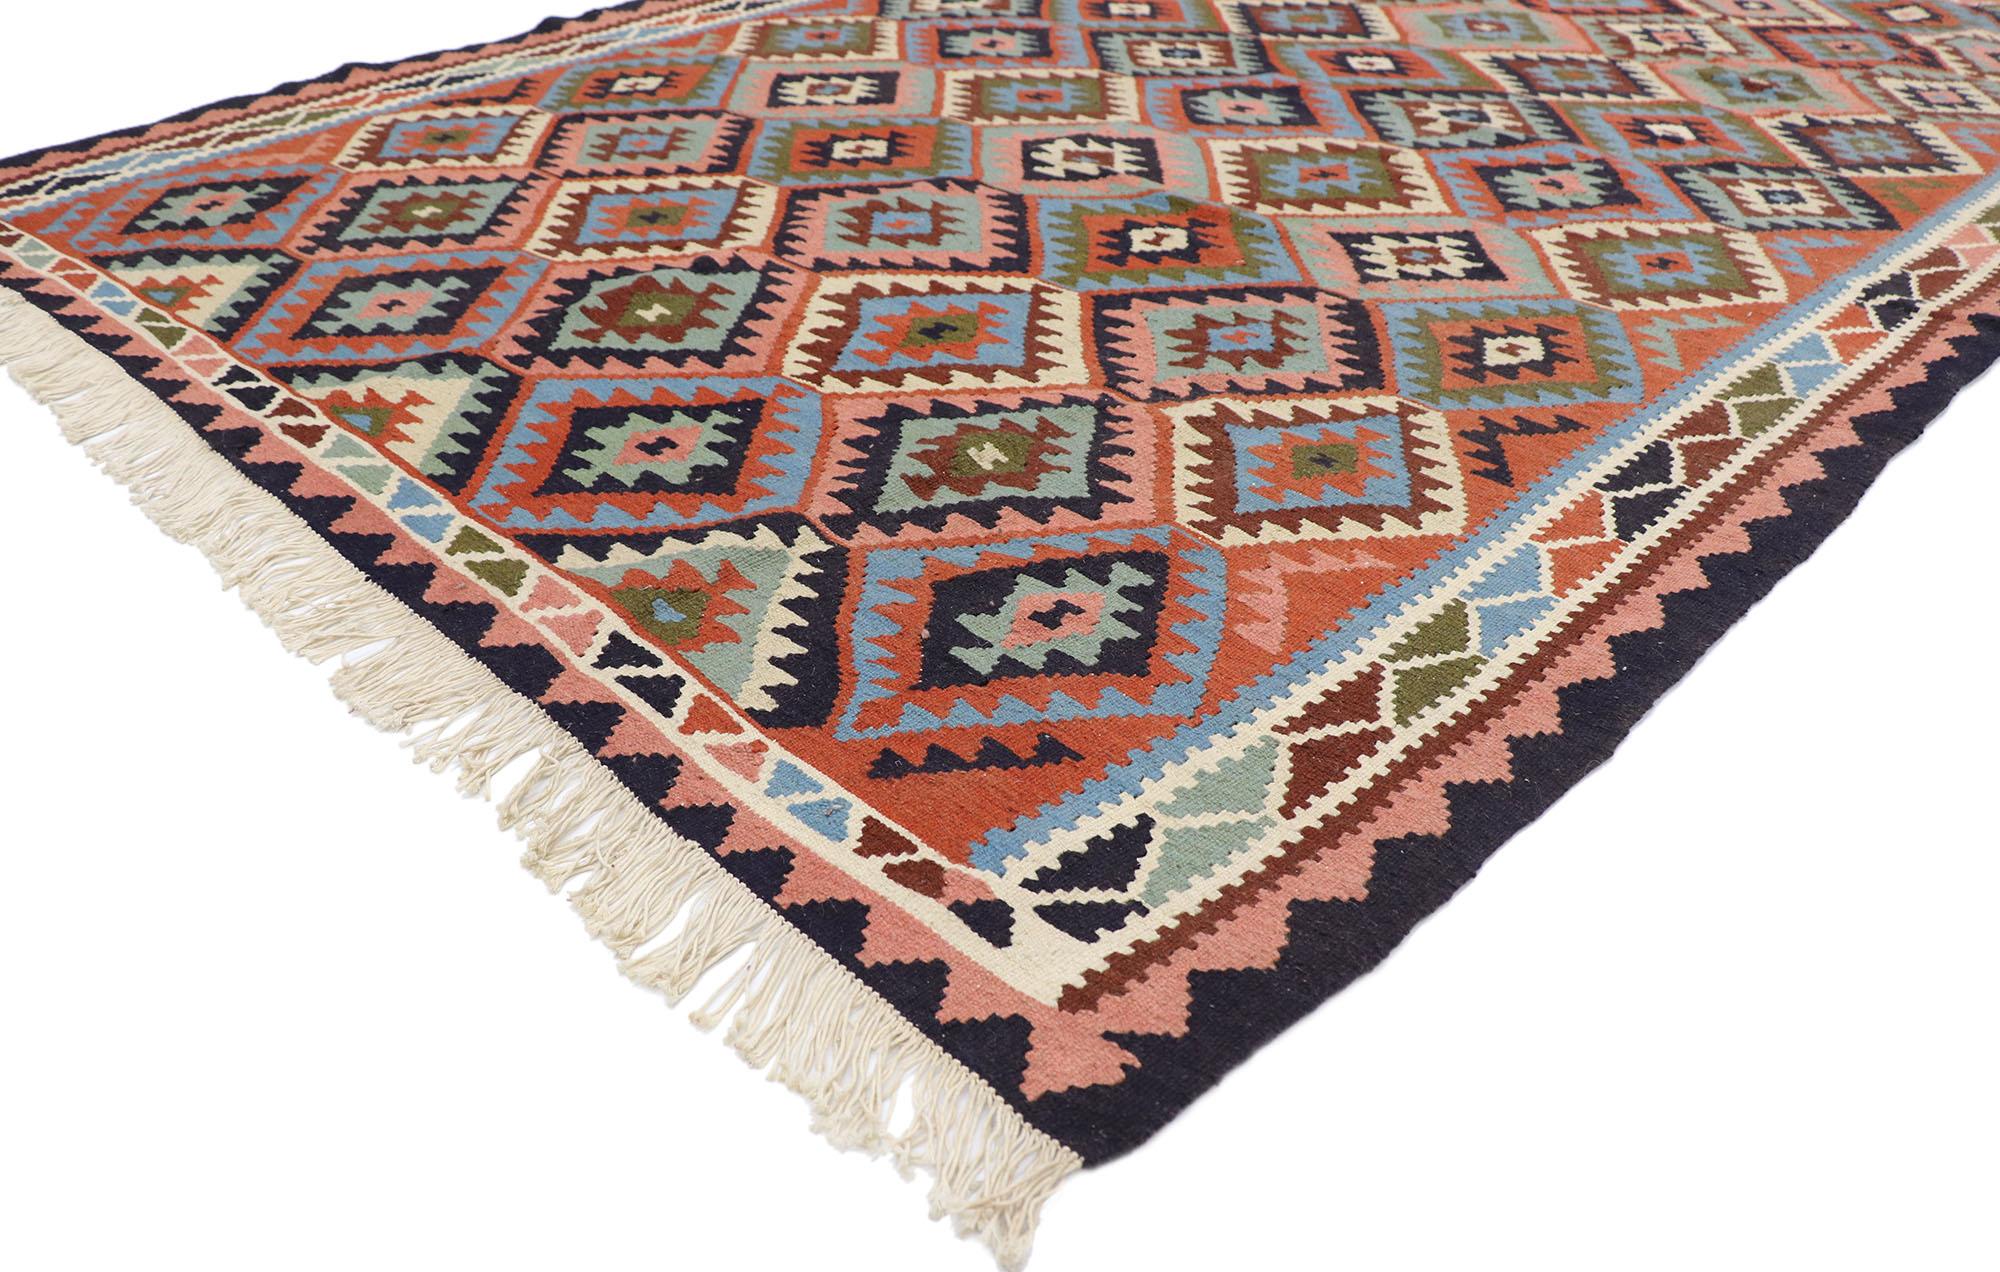 77923 Vintage Persian Shiraz Kilim rug with Southwestern Tribal Style 06'06 x 09'02. Full of tiny details and a bold expressive design combined with vibrant colors and tribal style, this hand-woven wool vintage Persian Shiraz kilim rug is a